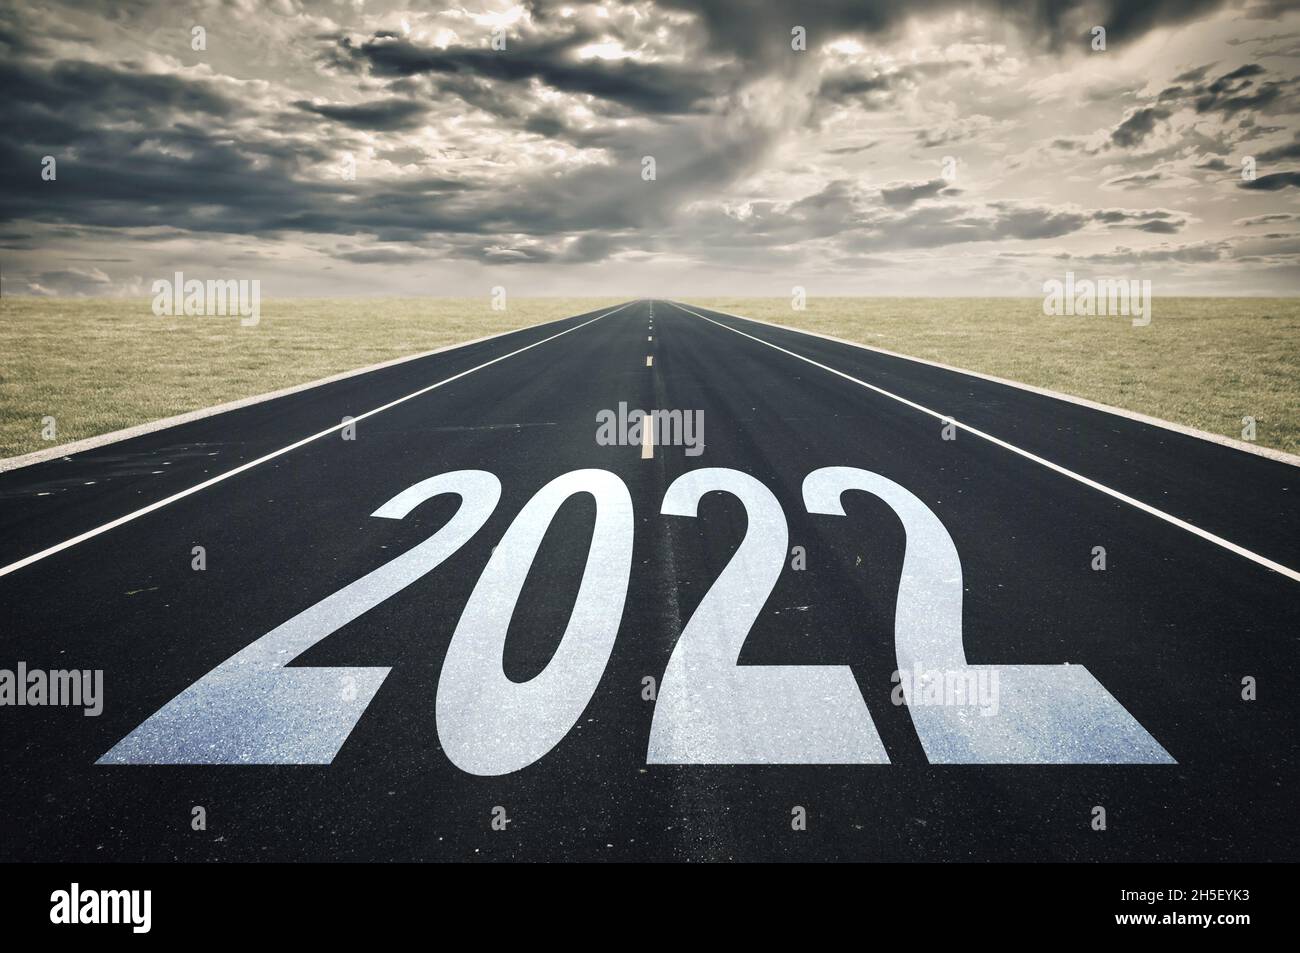 2022 road perspective, dark clouds, crisis concept Stock Photo